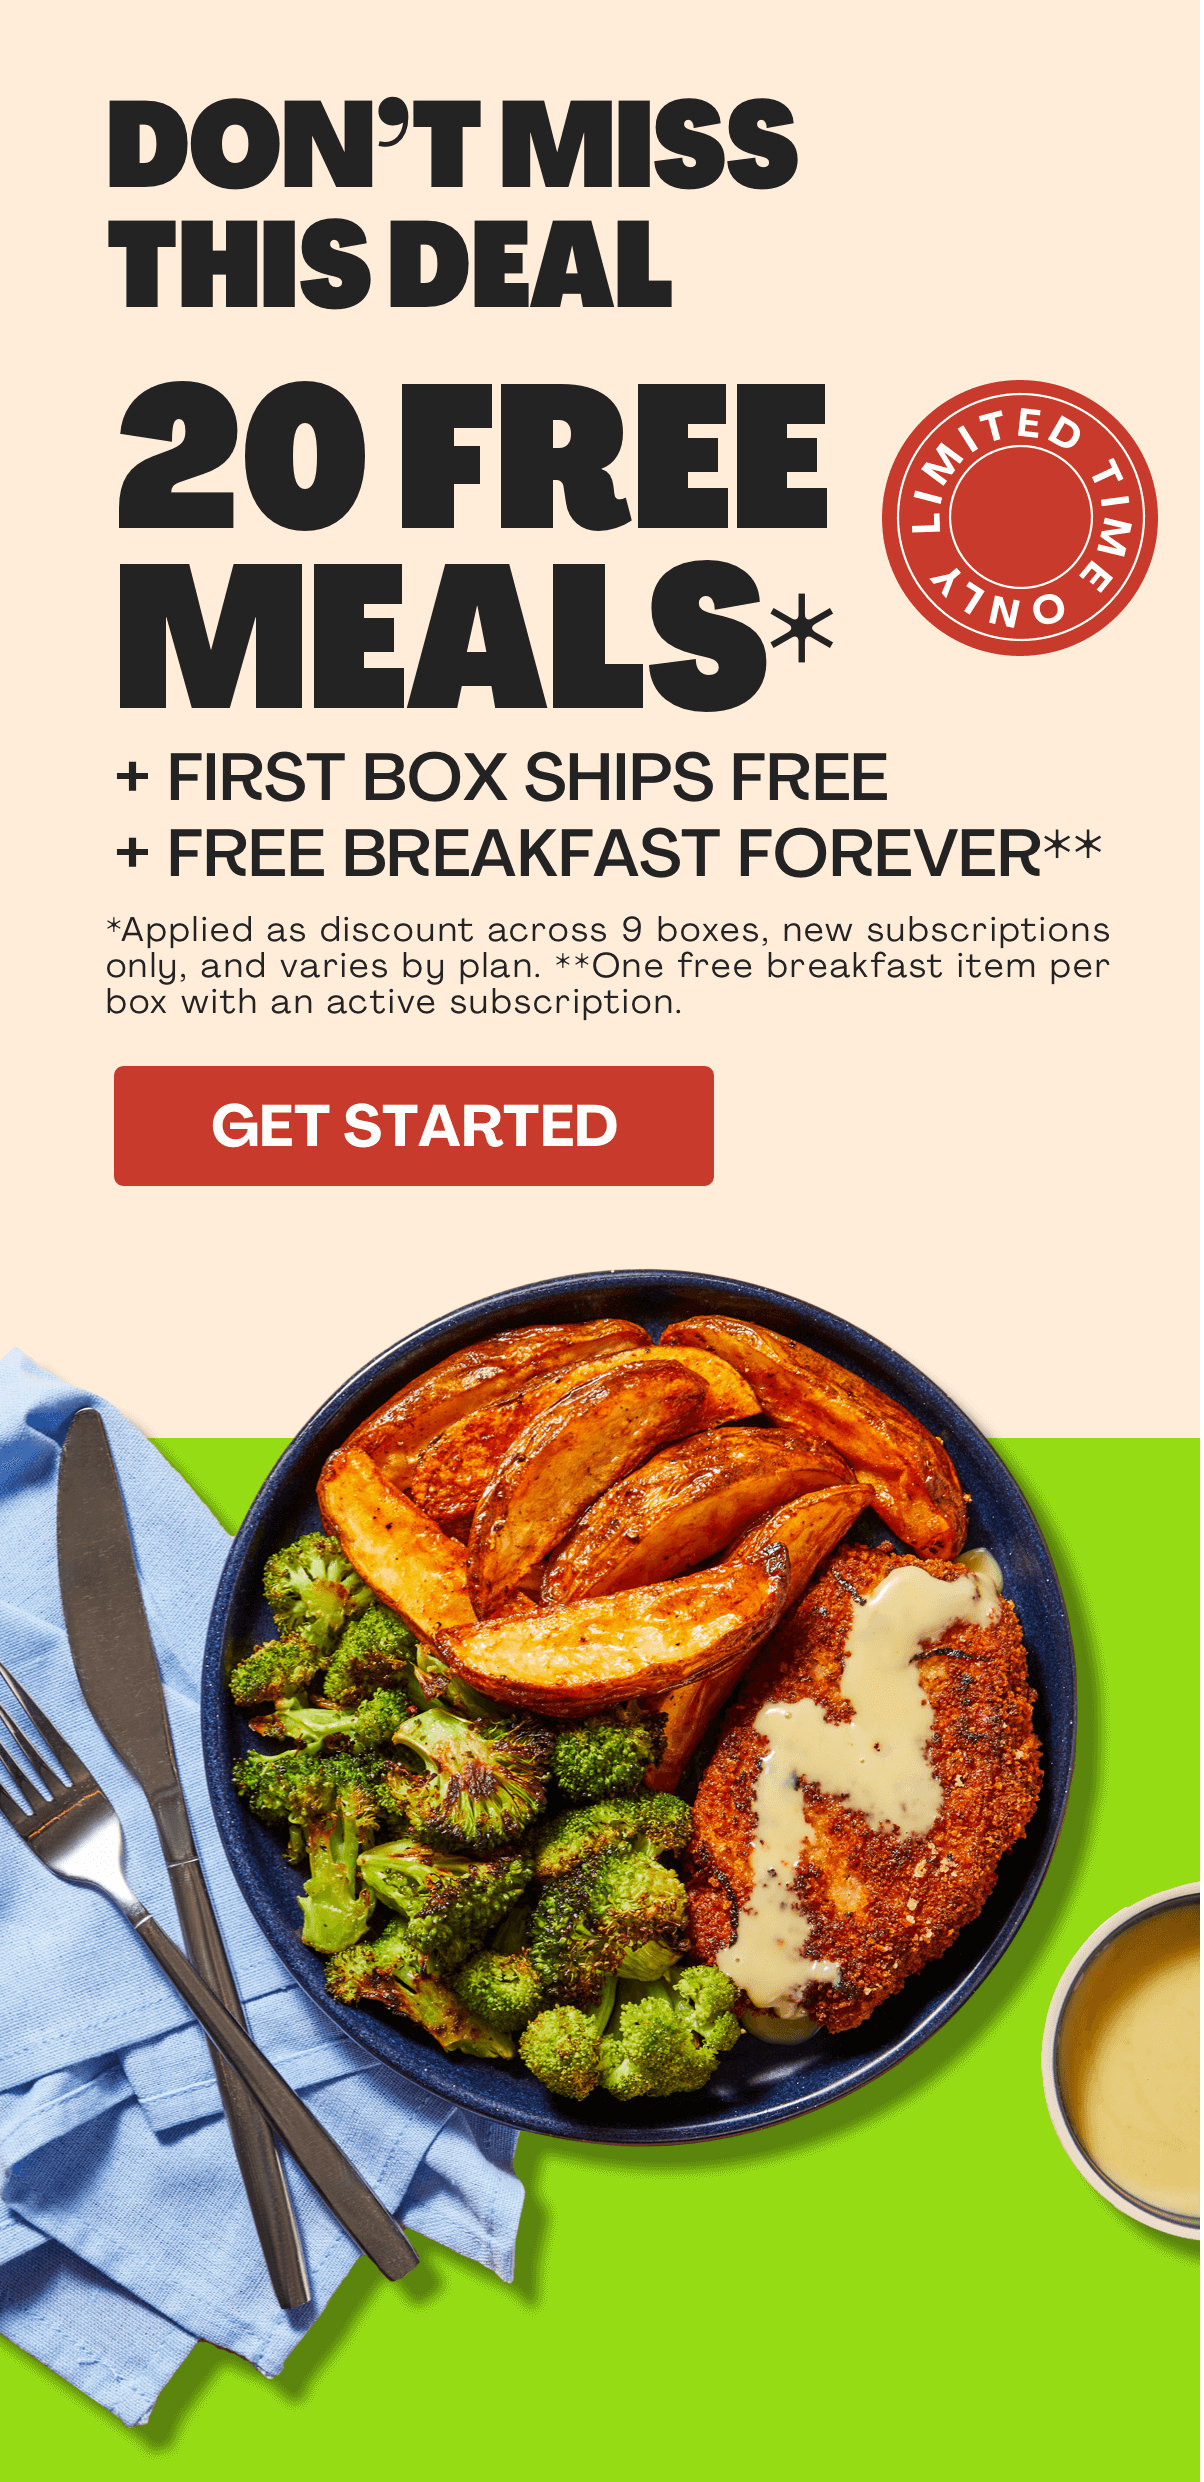 Get 20 FREE MEALS + FIRST BOX SHIPS FREE + FREE BREAKFAST FOR LIFE!